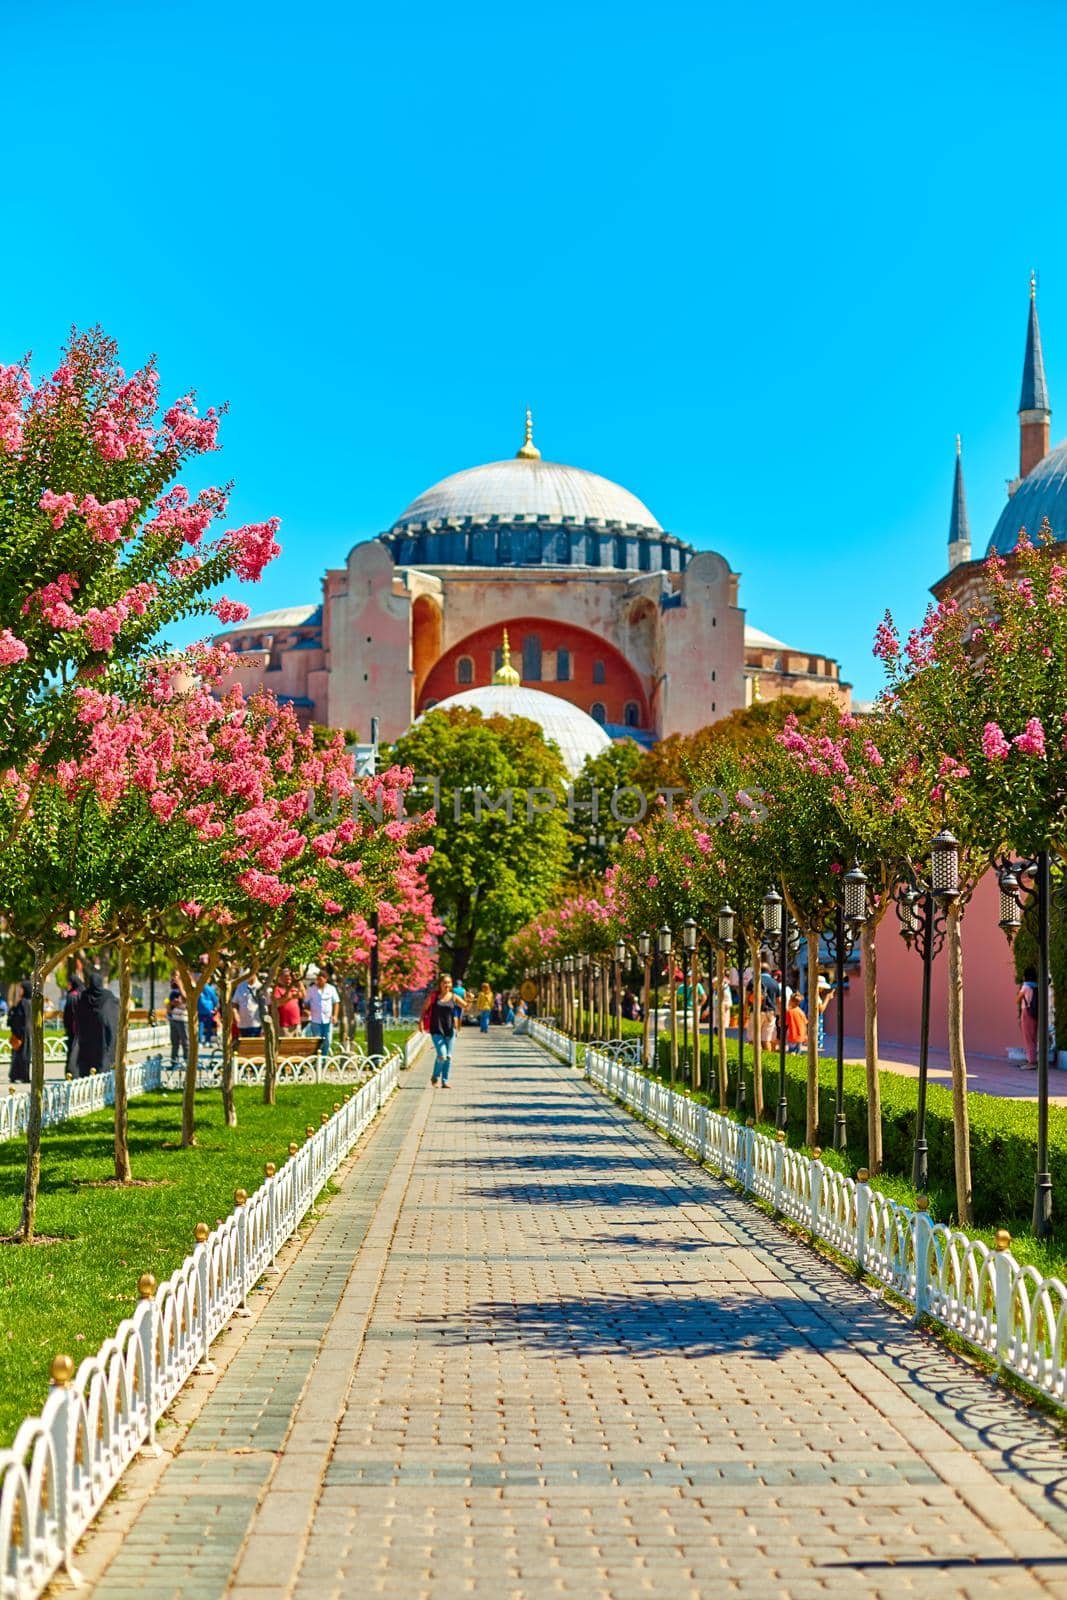 Sophia Mosque in Istanbul. A beautiful park with flowering trees. Warm summer day. Istanbul, Turkey - 28.07.2017